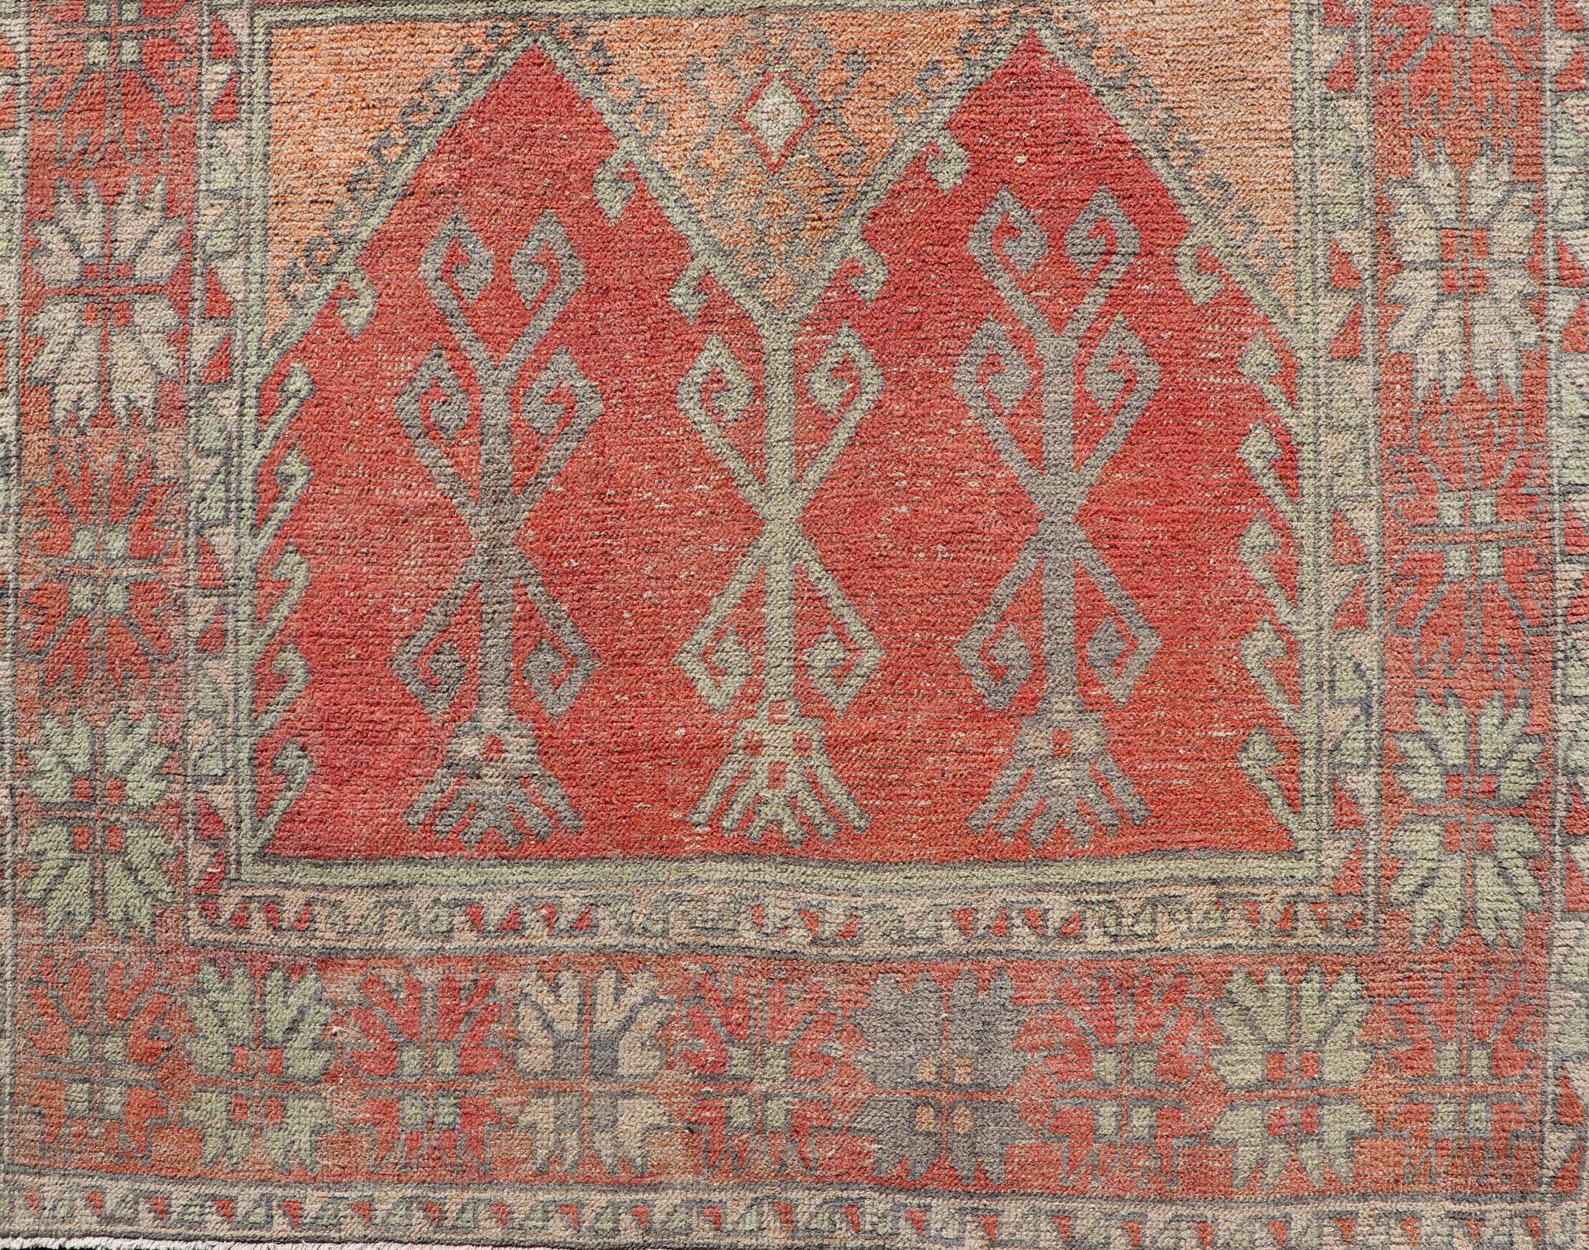 Gallery Rug, Vintage Turkish in Faded Red, Coral, Orange, Soft Pink and Green For Sale 8